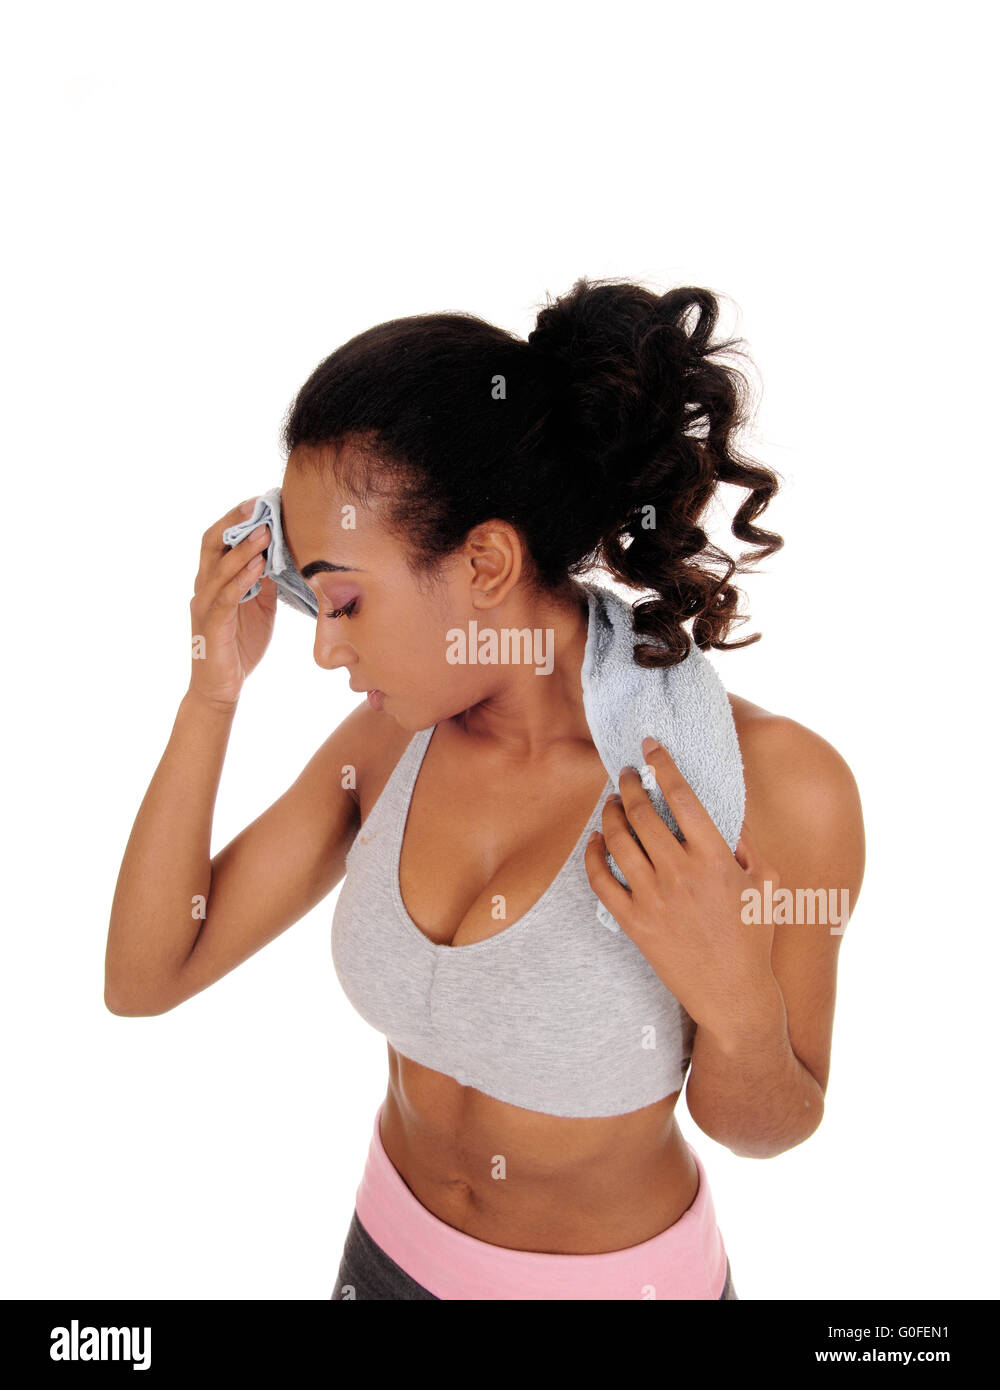 African American girl sweating after workout. Stock Photo